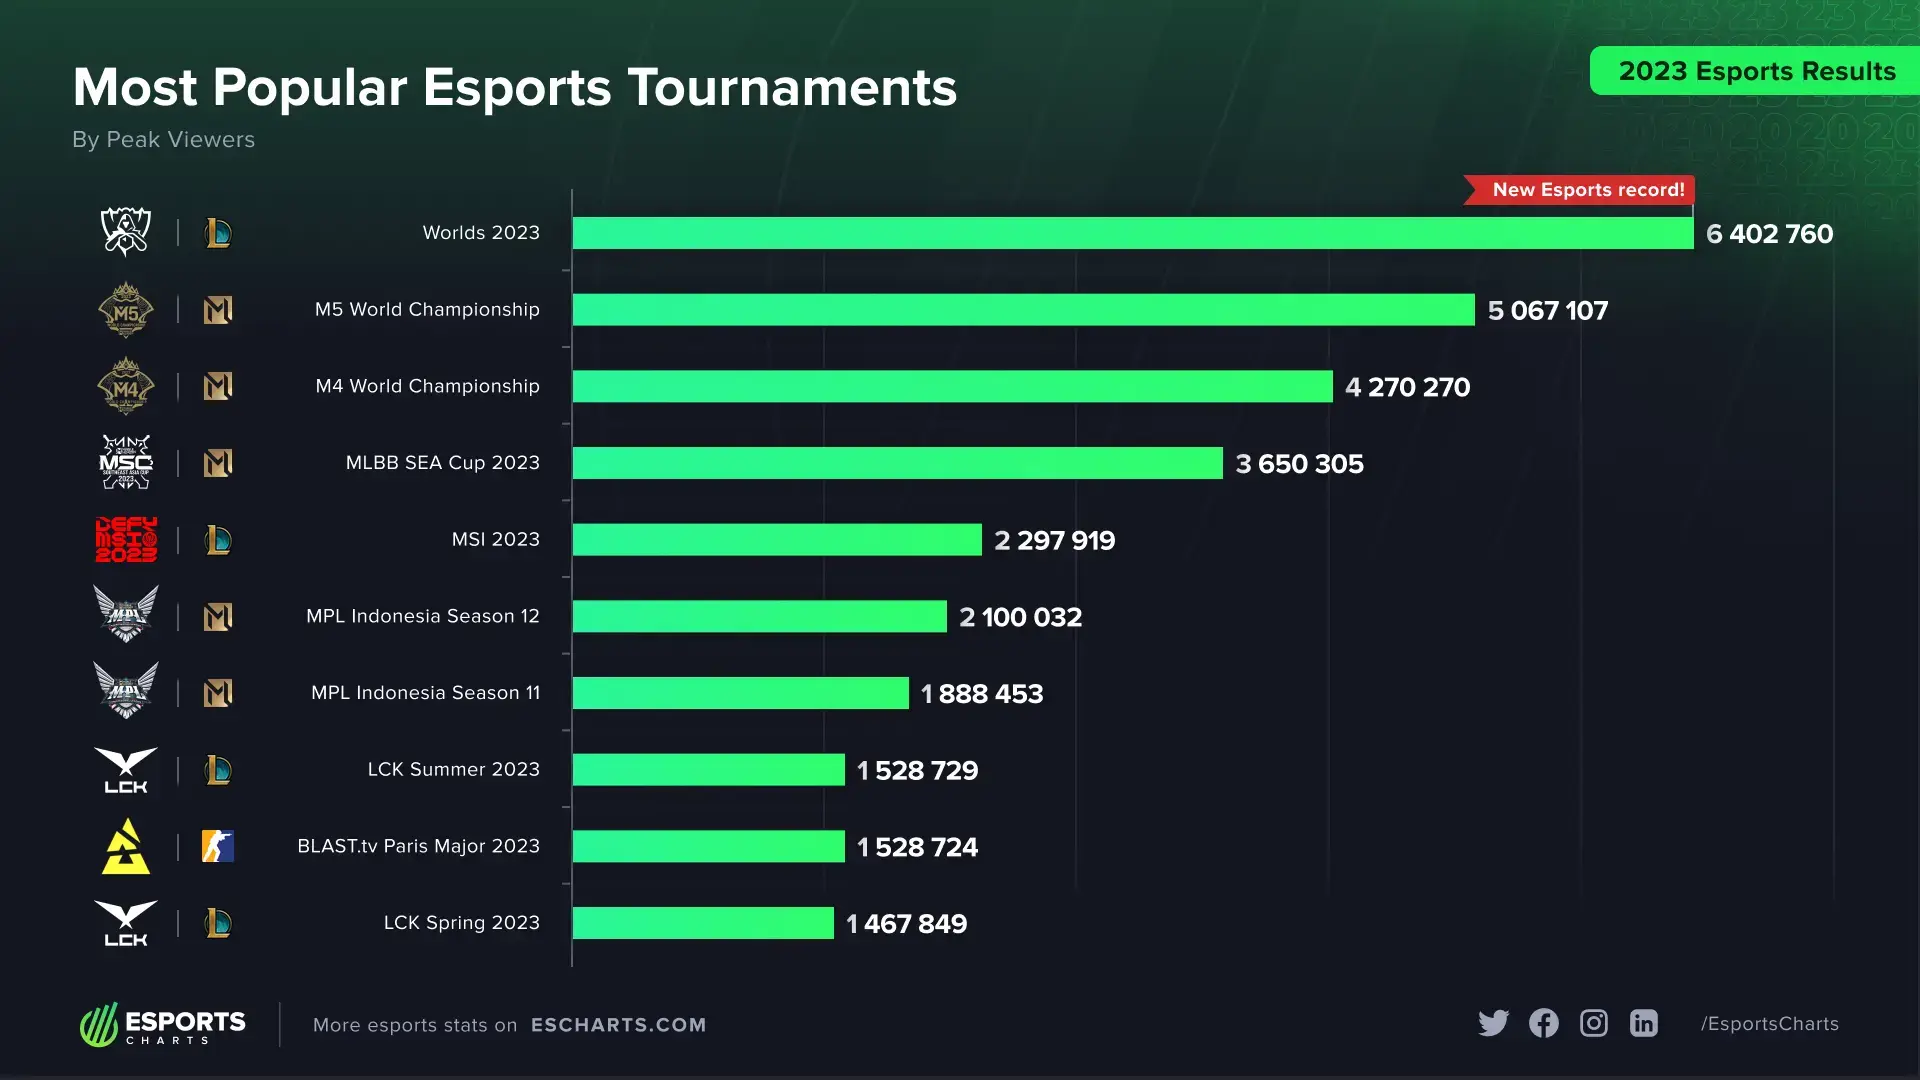 Most Popular Esports Tournaments of the Year